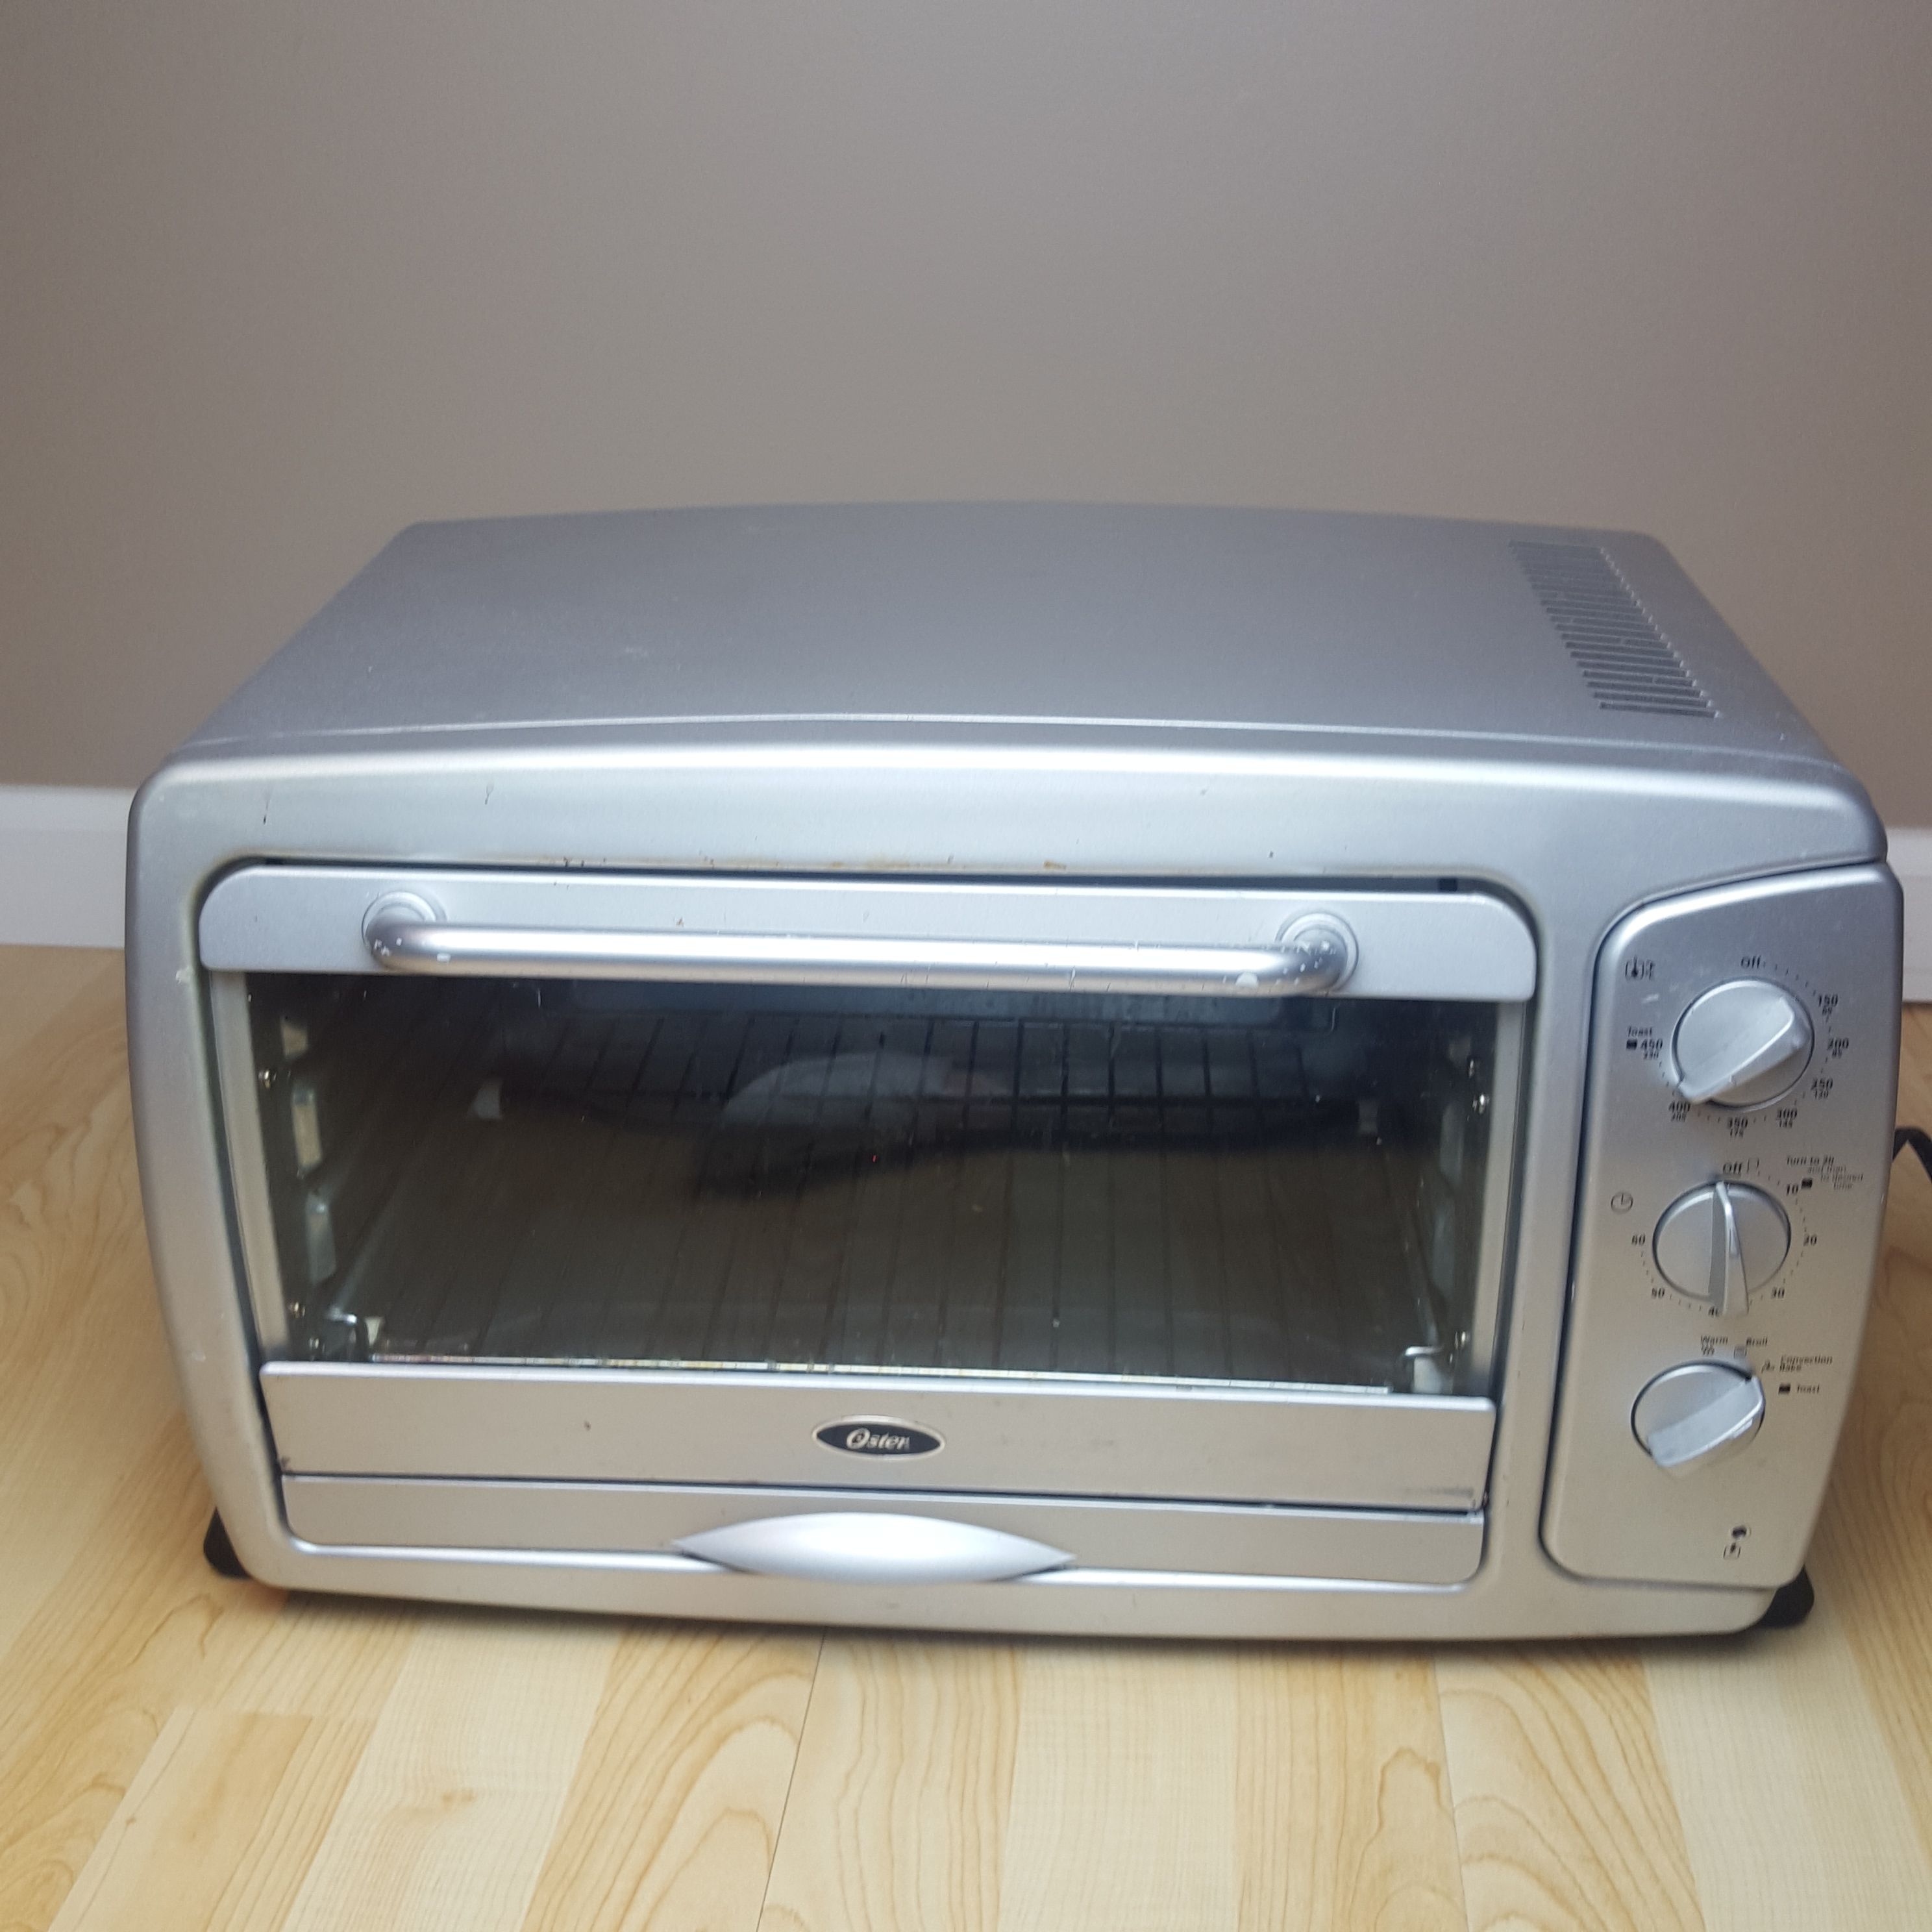 Oster Designed For Life Extra-Large Convection Countertop Toaster Oven New  in Sealed Box for Sale in Las Vegas, NV - OfferUp